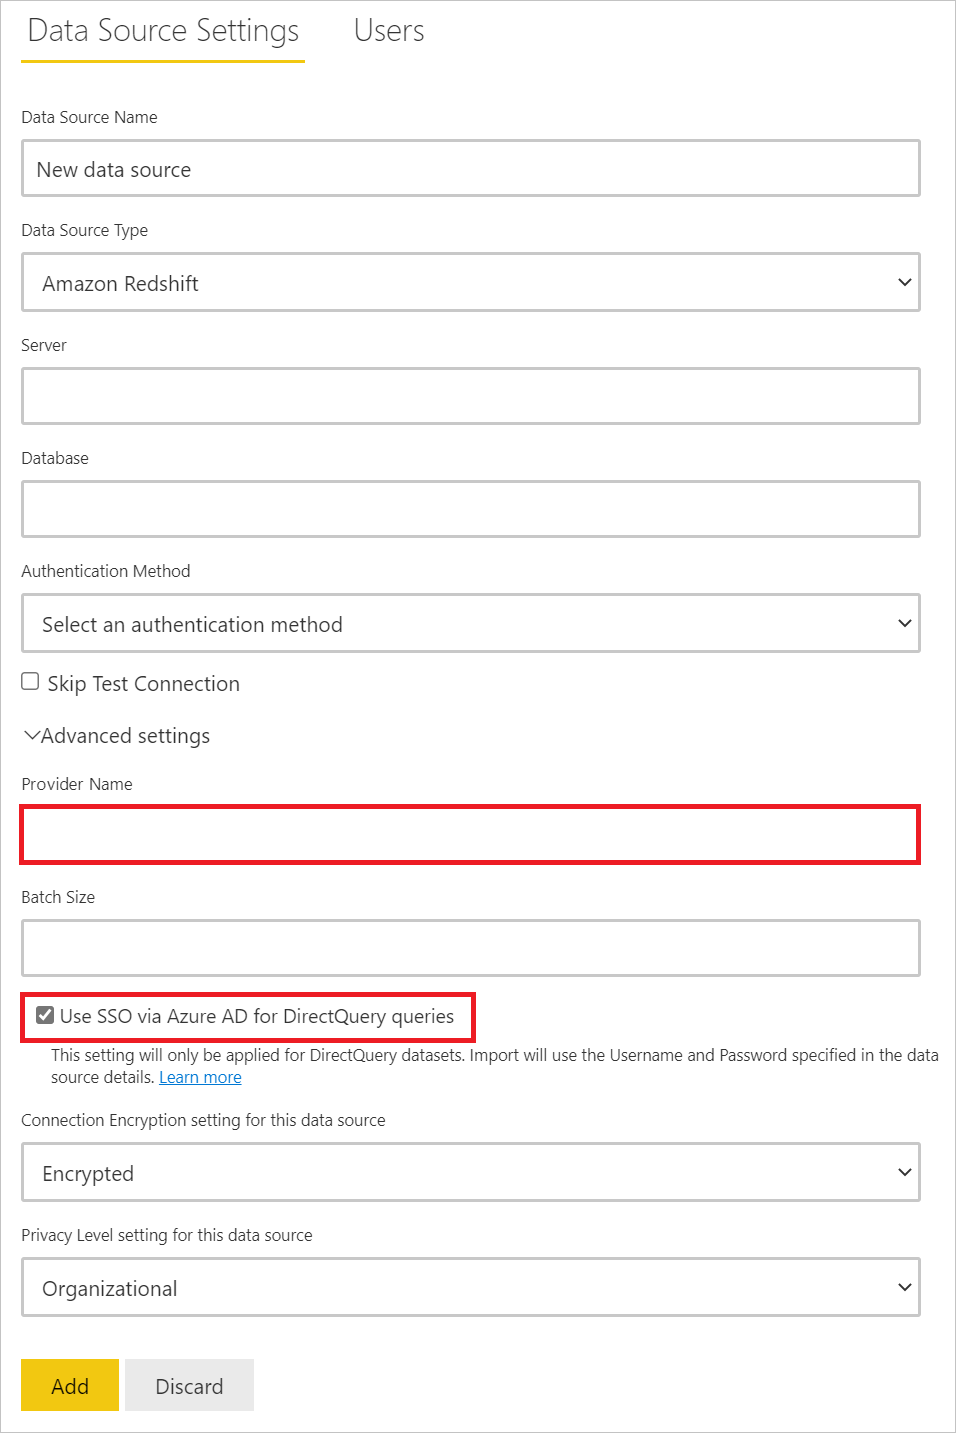 Image of the Data Source Settings tab with the Provider Name and Use SSO via Azure AD for DirectQuery queries advanced settings emphasized.